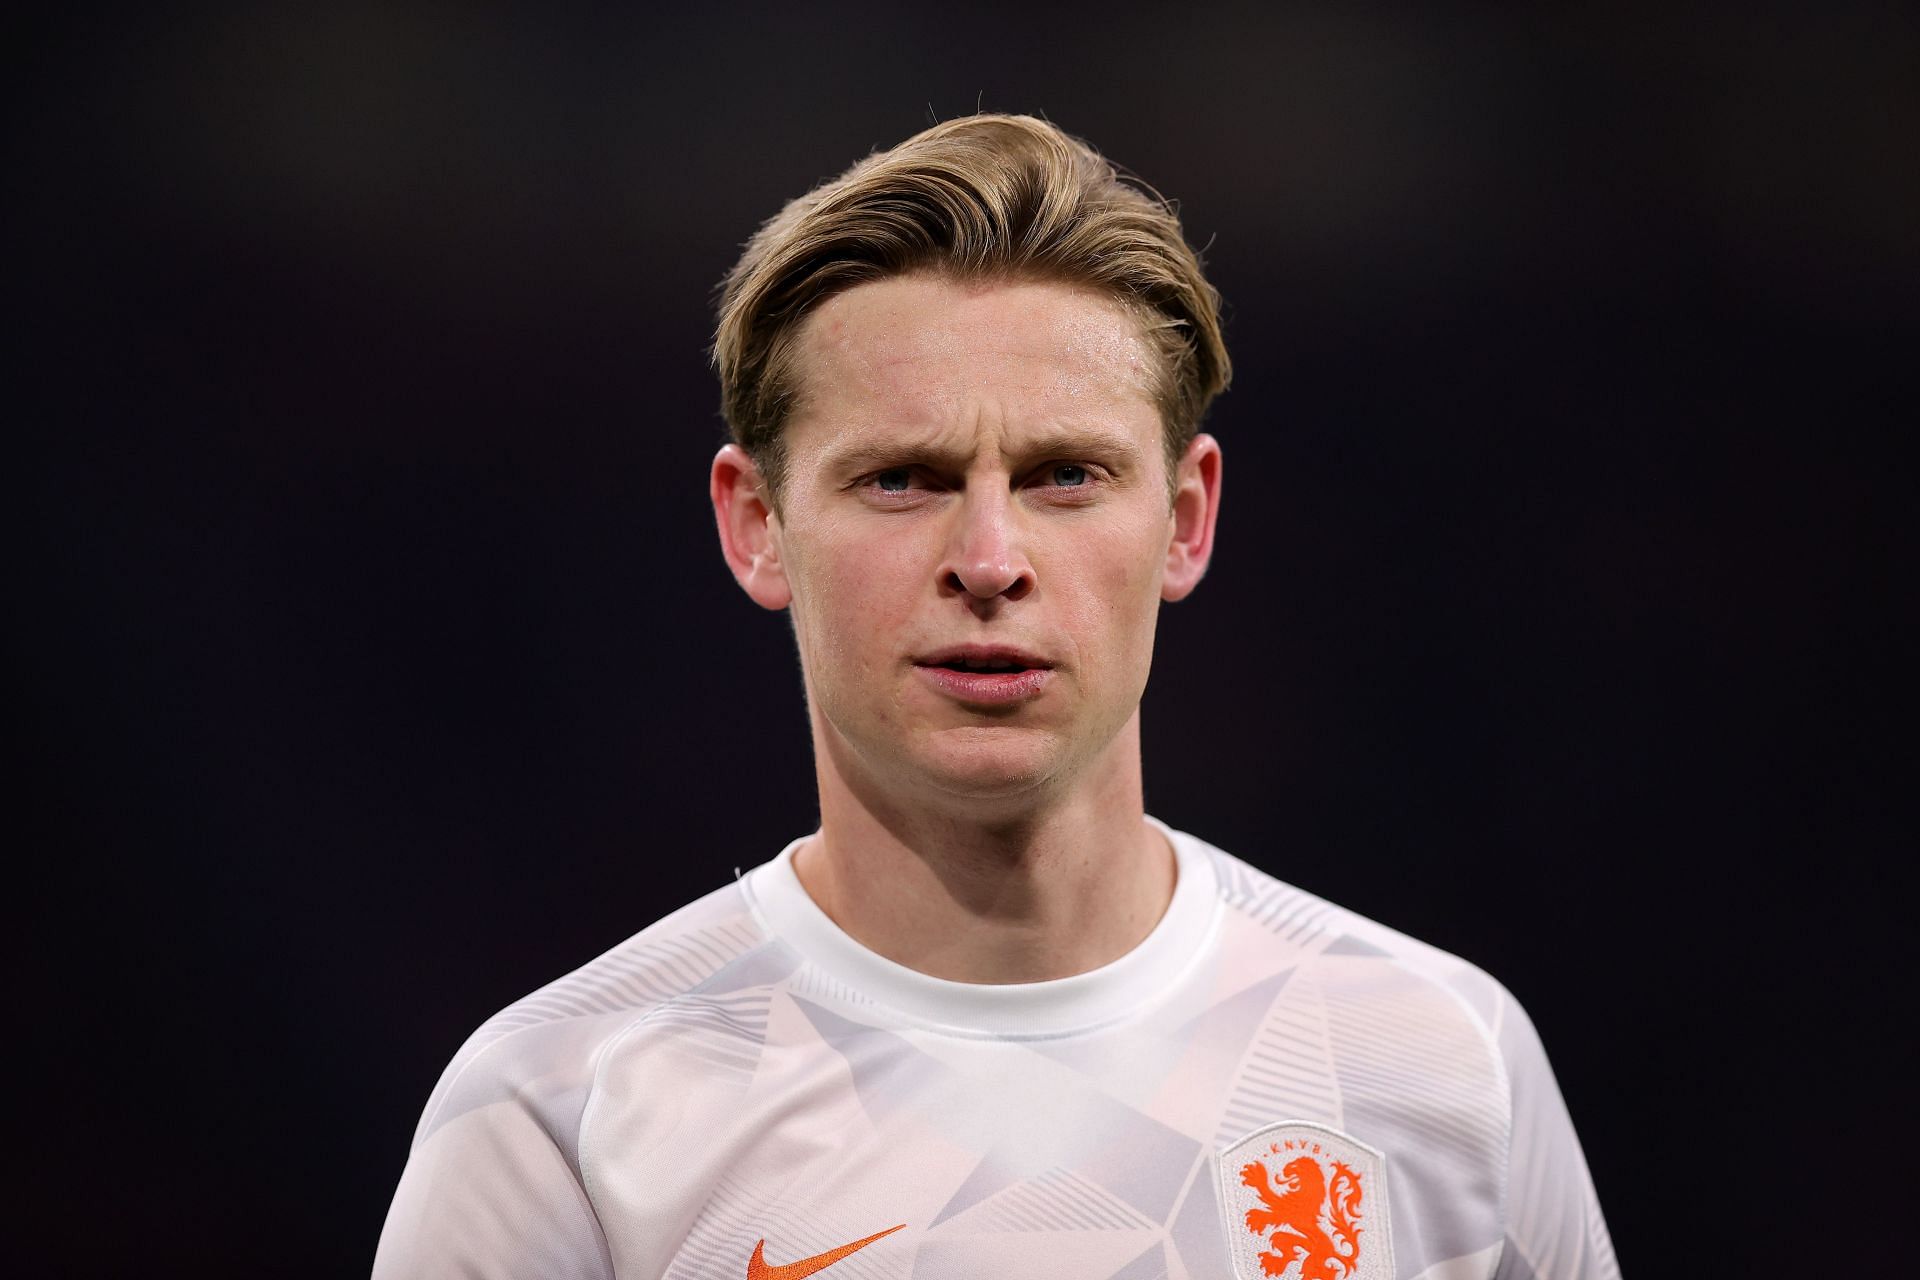 The Netherlands have a point to prove